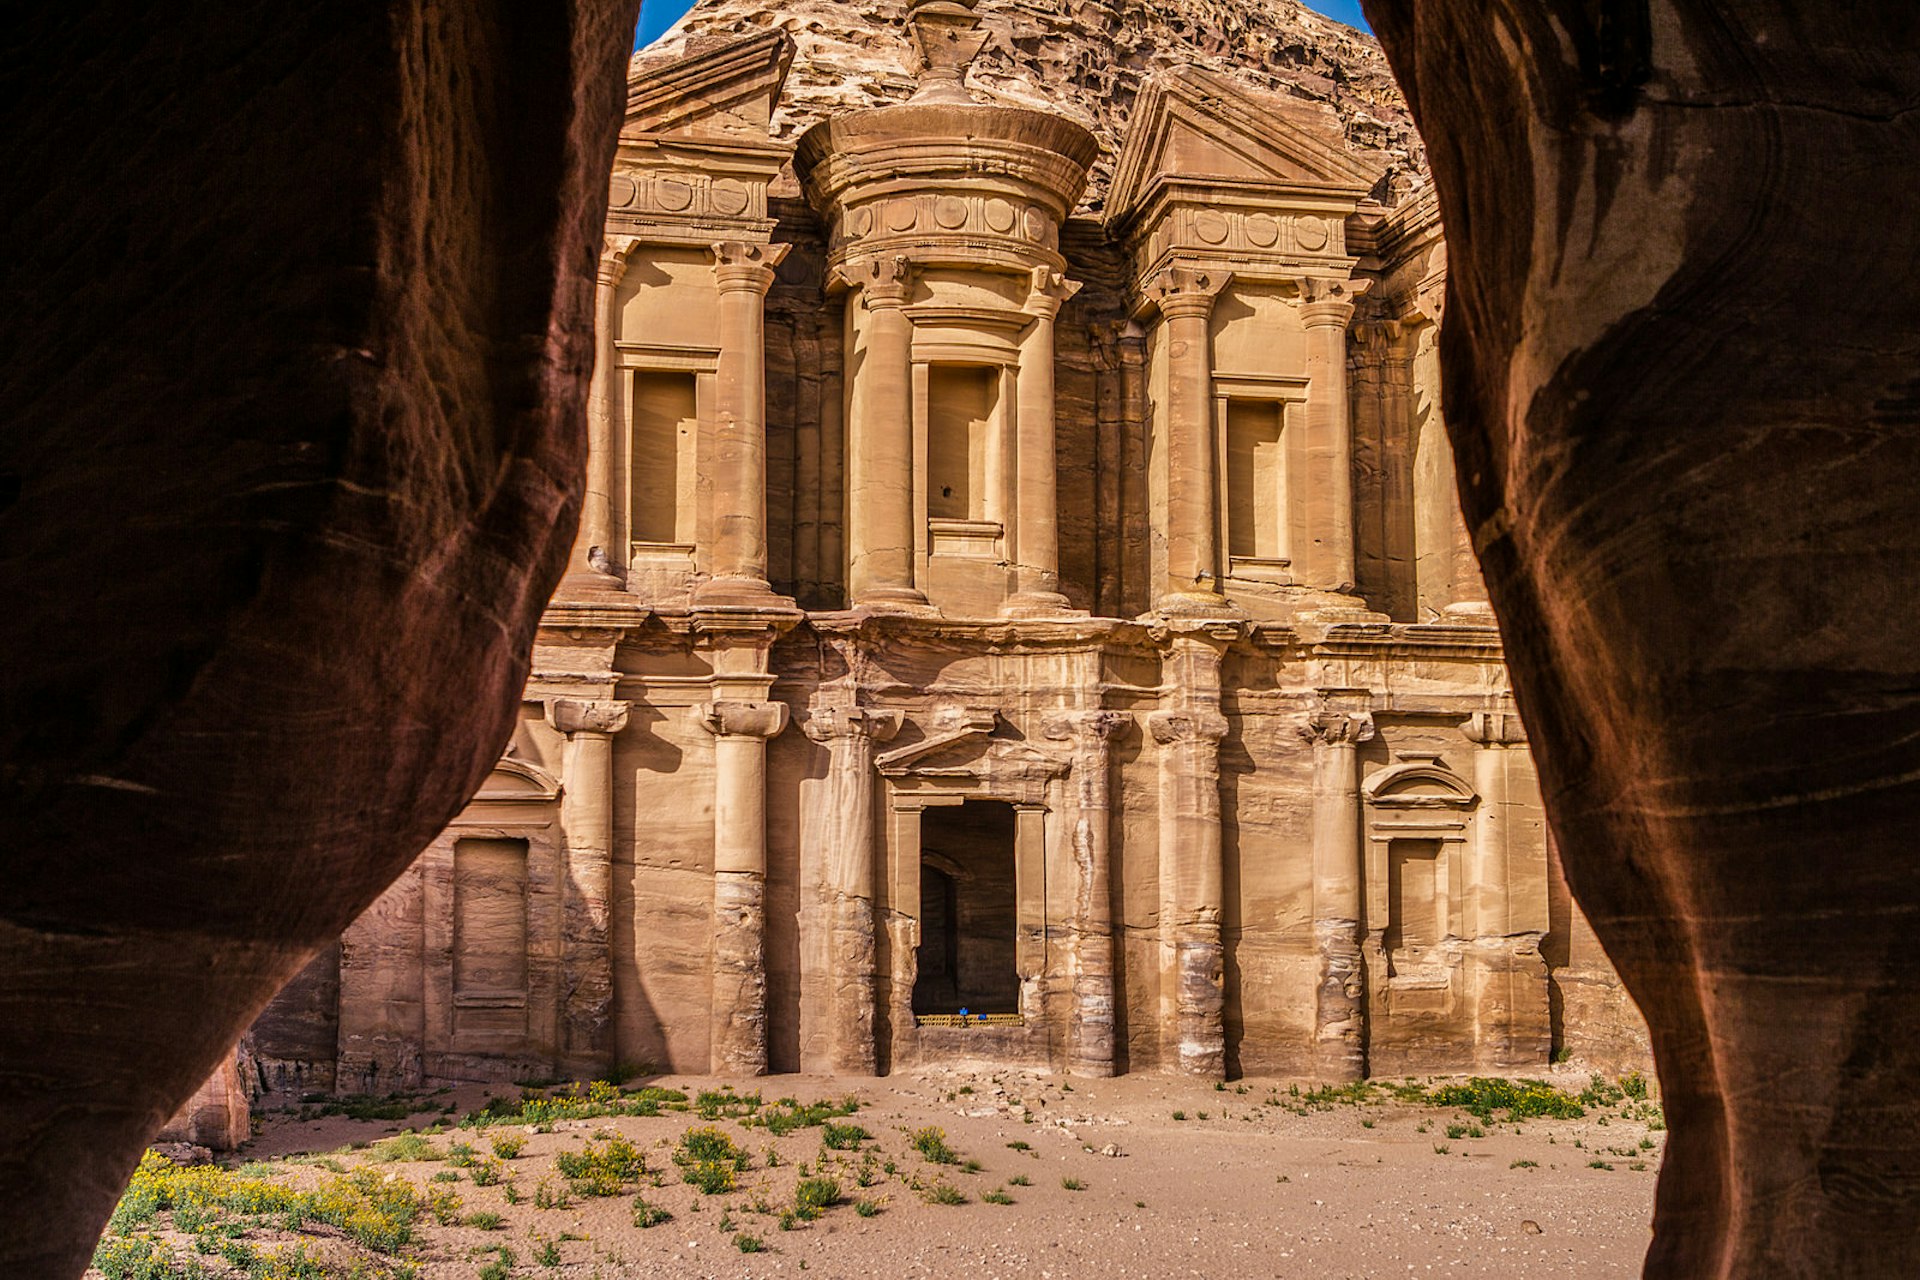 View of Petra's Monastery from the Jordan Trail. Image by Ali Barqawi Studios